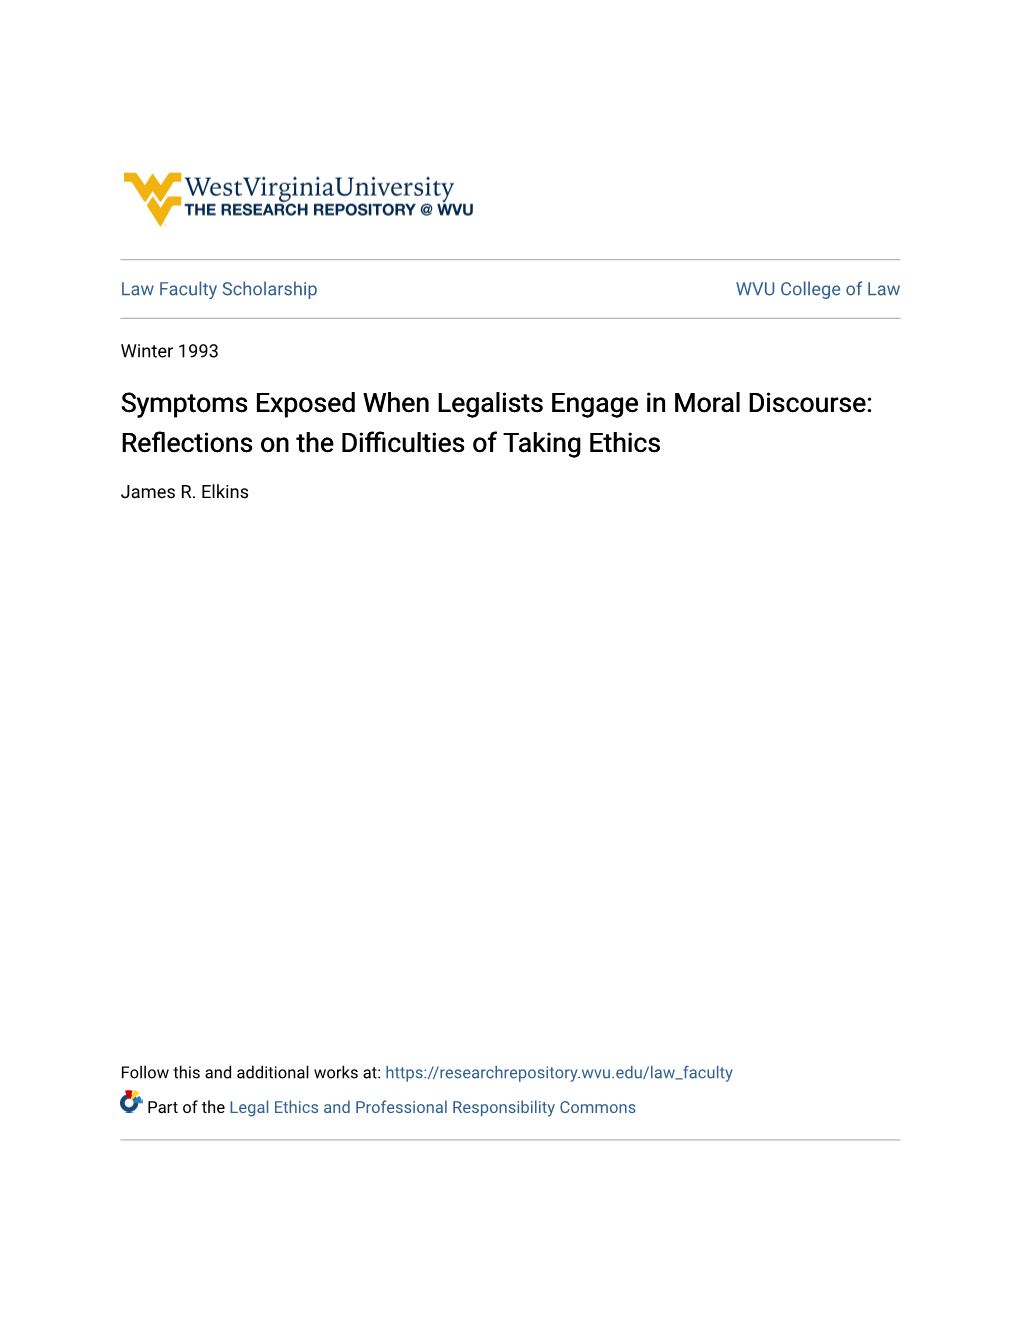 Symptoms Exposed When Legalists Engage in Moral Discourse: Reflections on the Difficulties Ofaking T Ethics